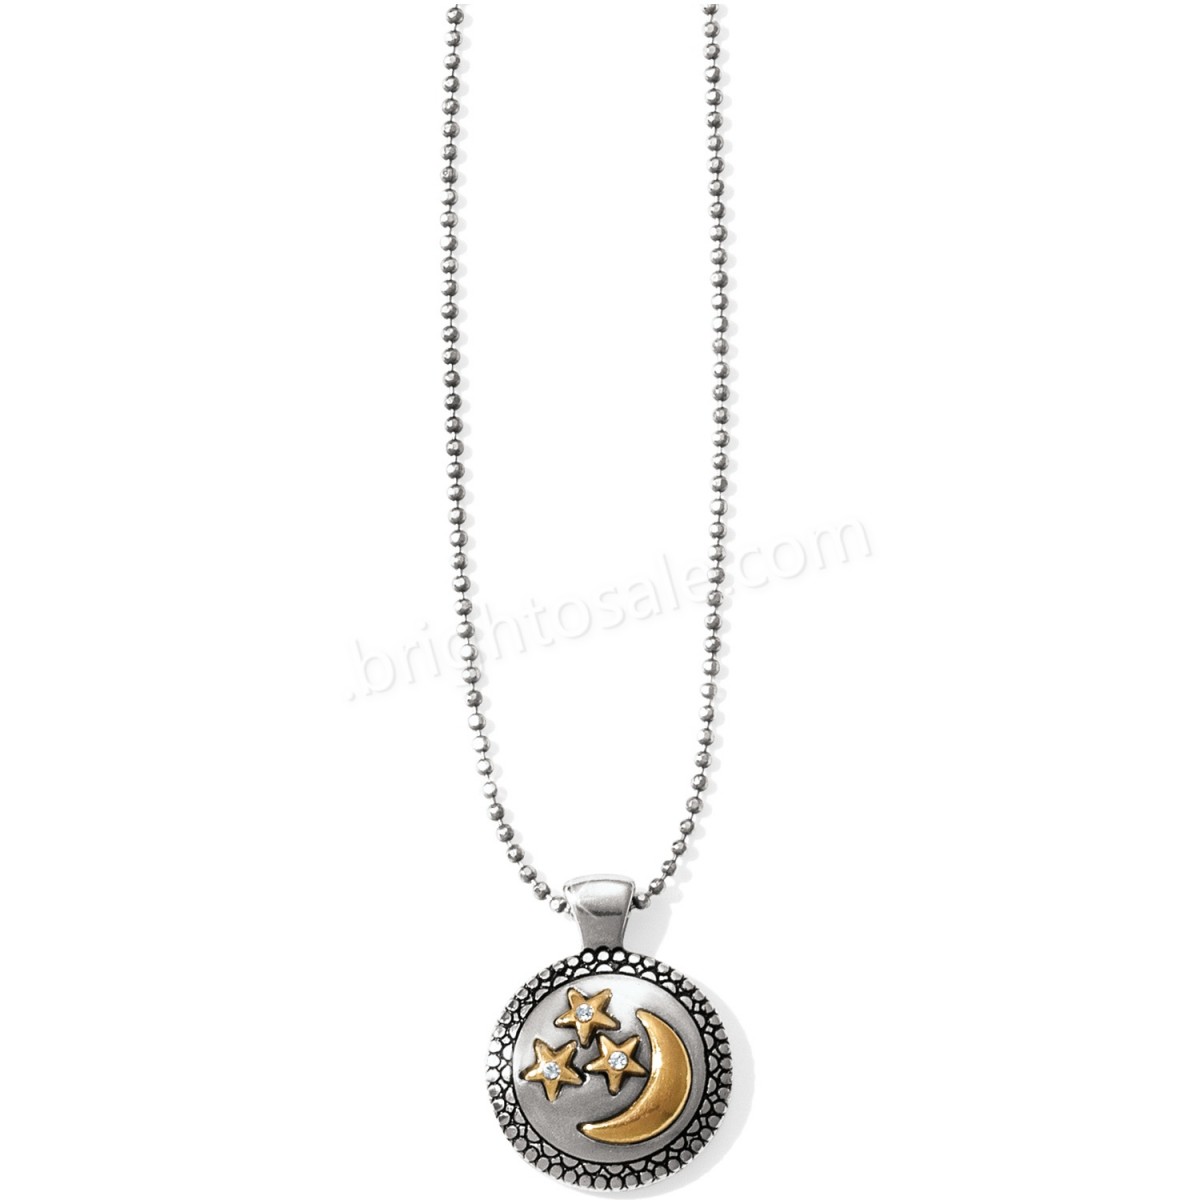 Brighton Collectibles & Online Discount Cherished Stars & Moon Petite Necklace - -0